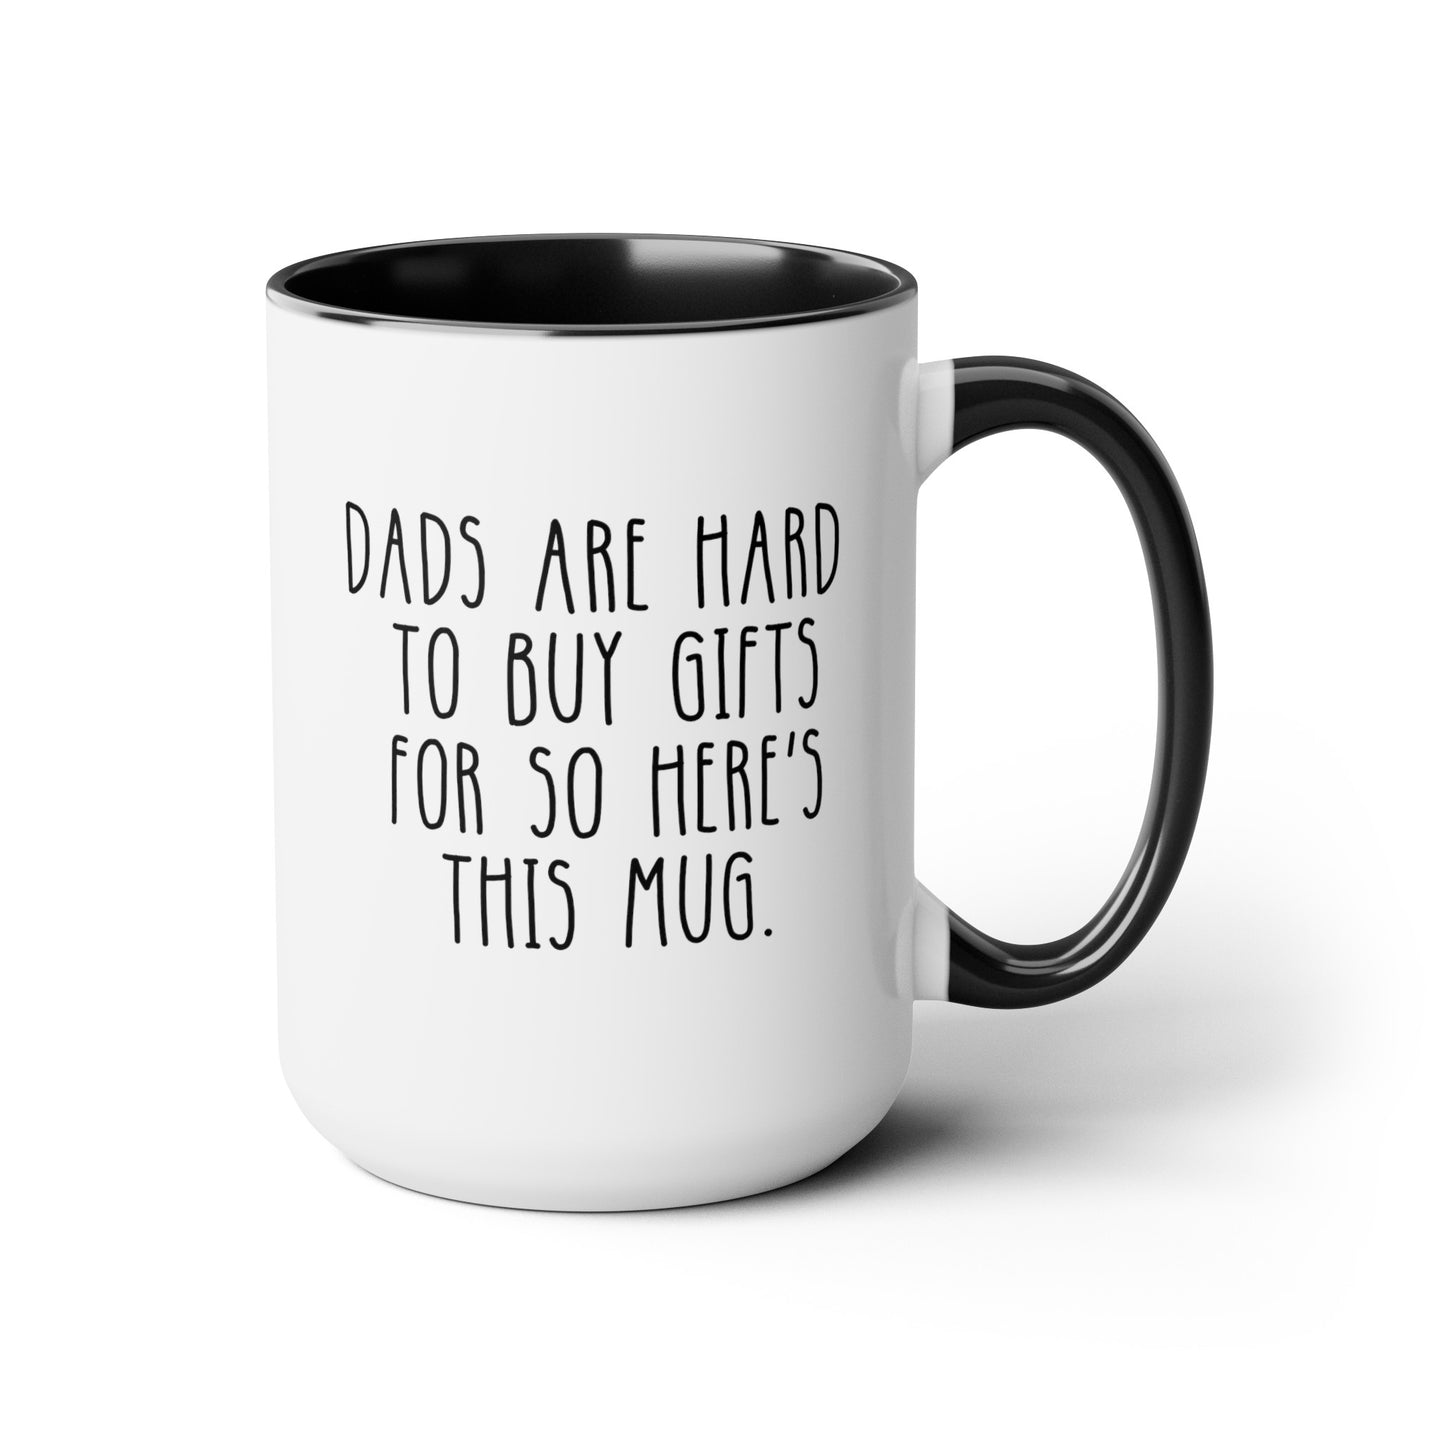 Dads Are Hard To Buy Gifts For So Here's This Mug 15oz white with black accent funny large coffee mug gift for father's day dad stepdad cute waveywares wavey wares wavywares wavy wares